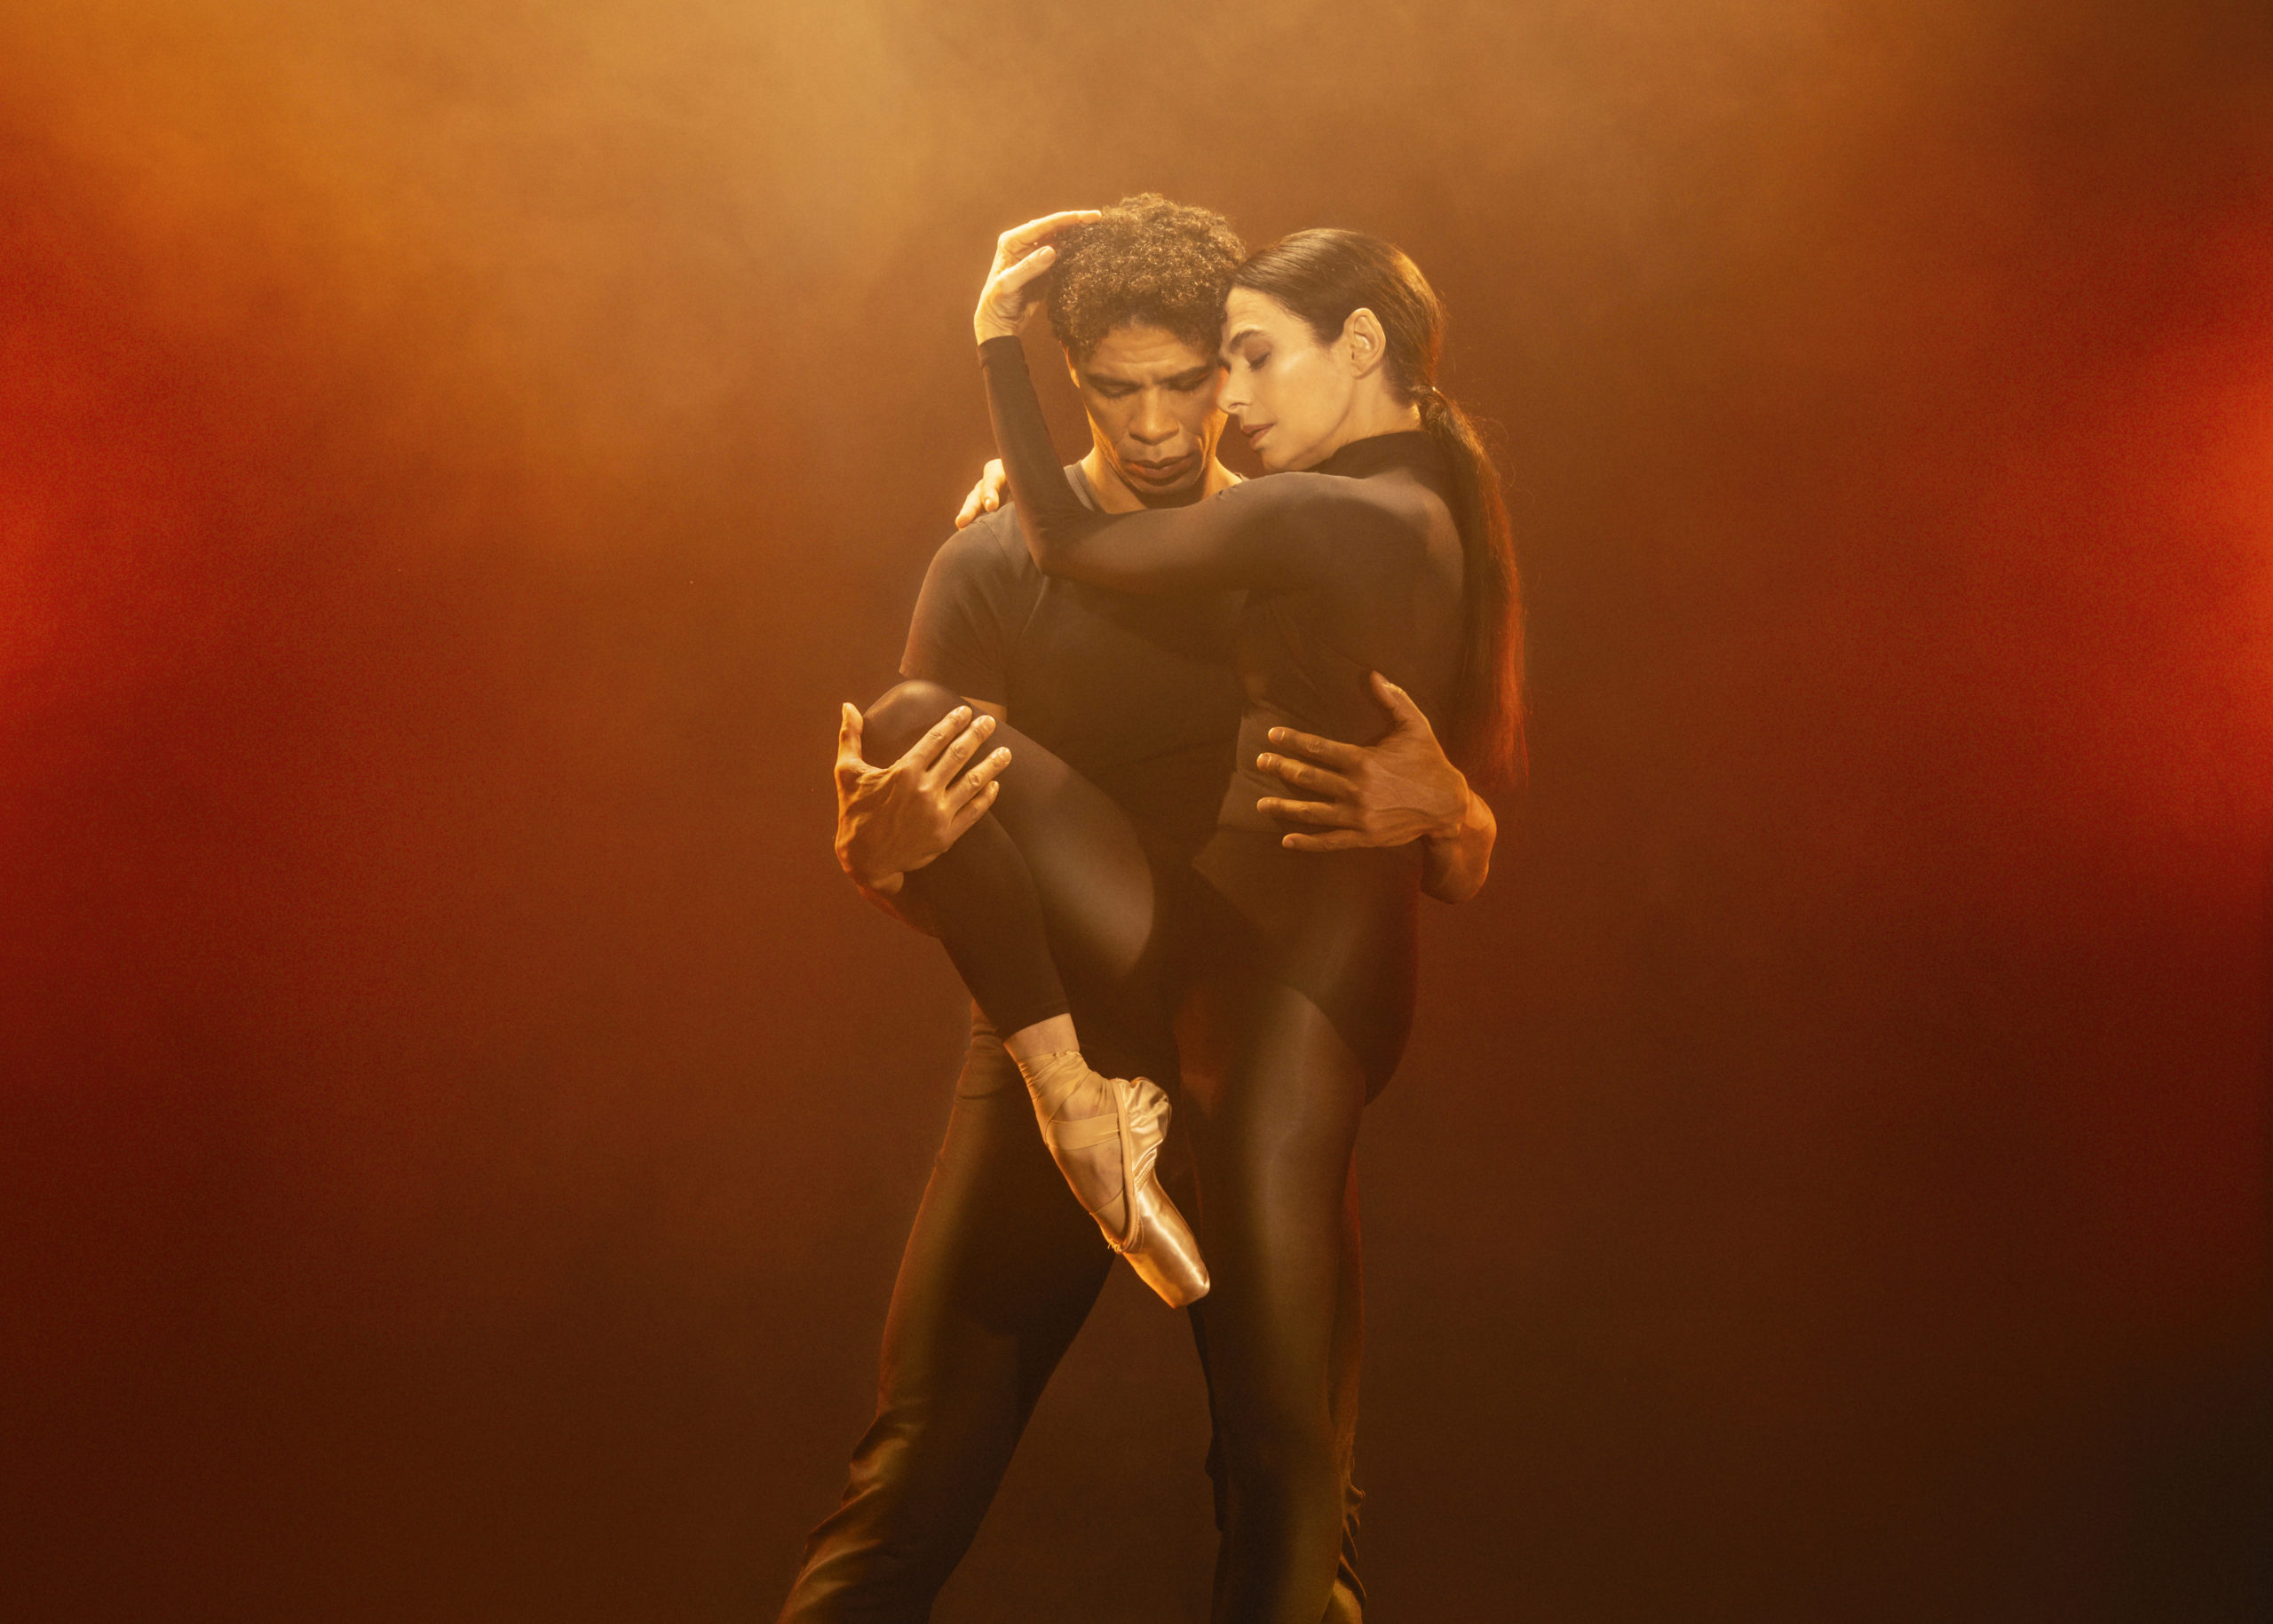 Carlos Acosta stands behind Alessandra Ferri and holds her around the waist with his left hand and her right leg up in a parallel retiré position with his right while she cradles his head in her hands. They both wear dark dance clothing and are lit with foggy, orange lighting.